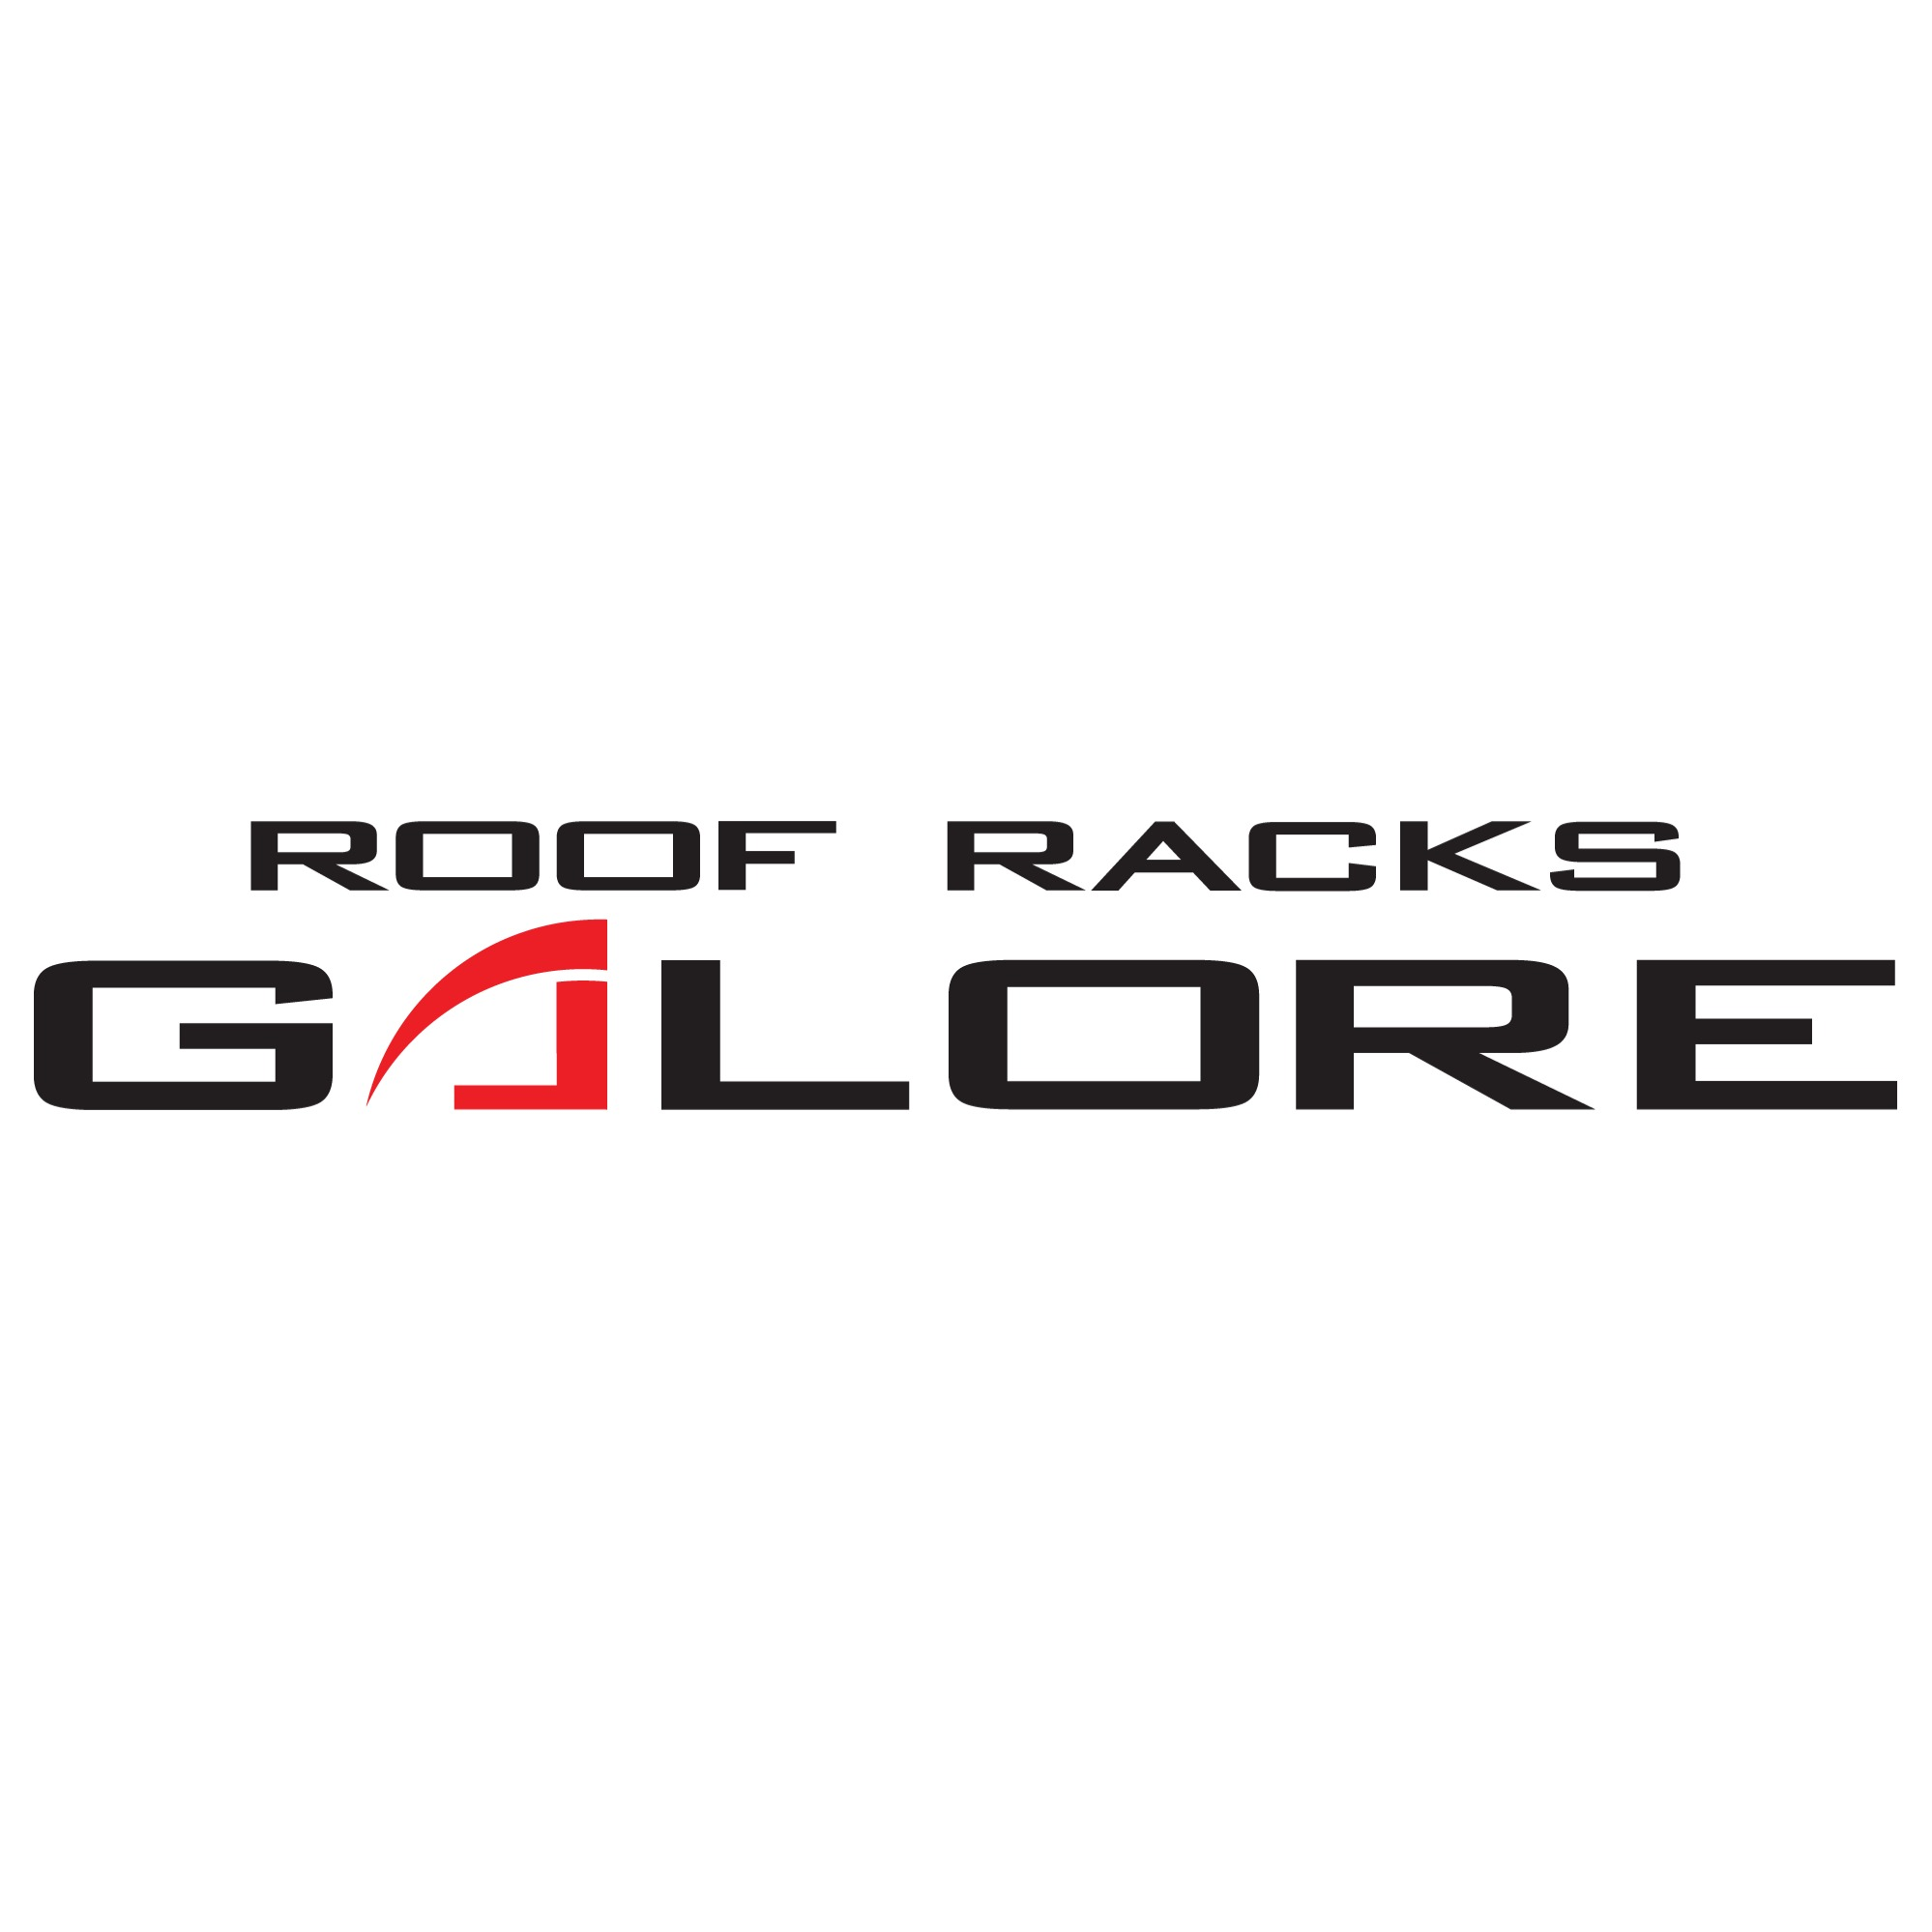 Roof Racks Galore, North Lakes Superstore Logo